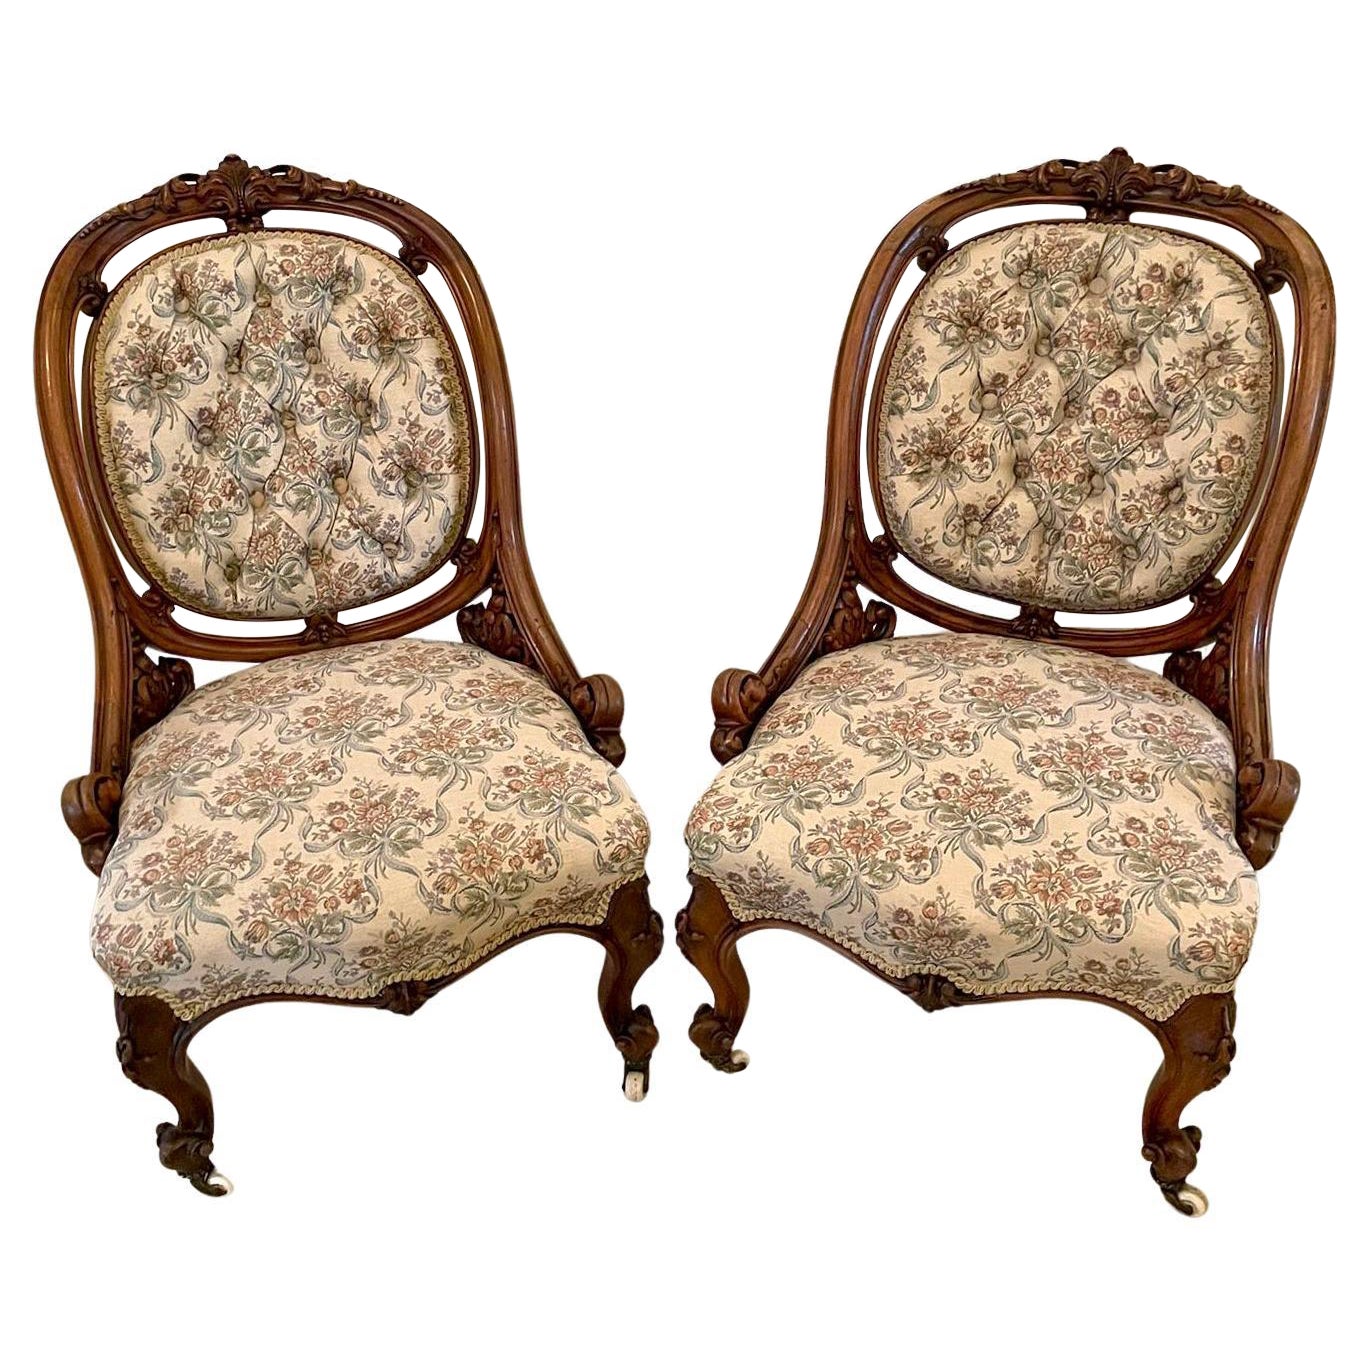 Outstanding Quality Antique Victorian Pair of Carved Walnut Chairs For Sale